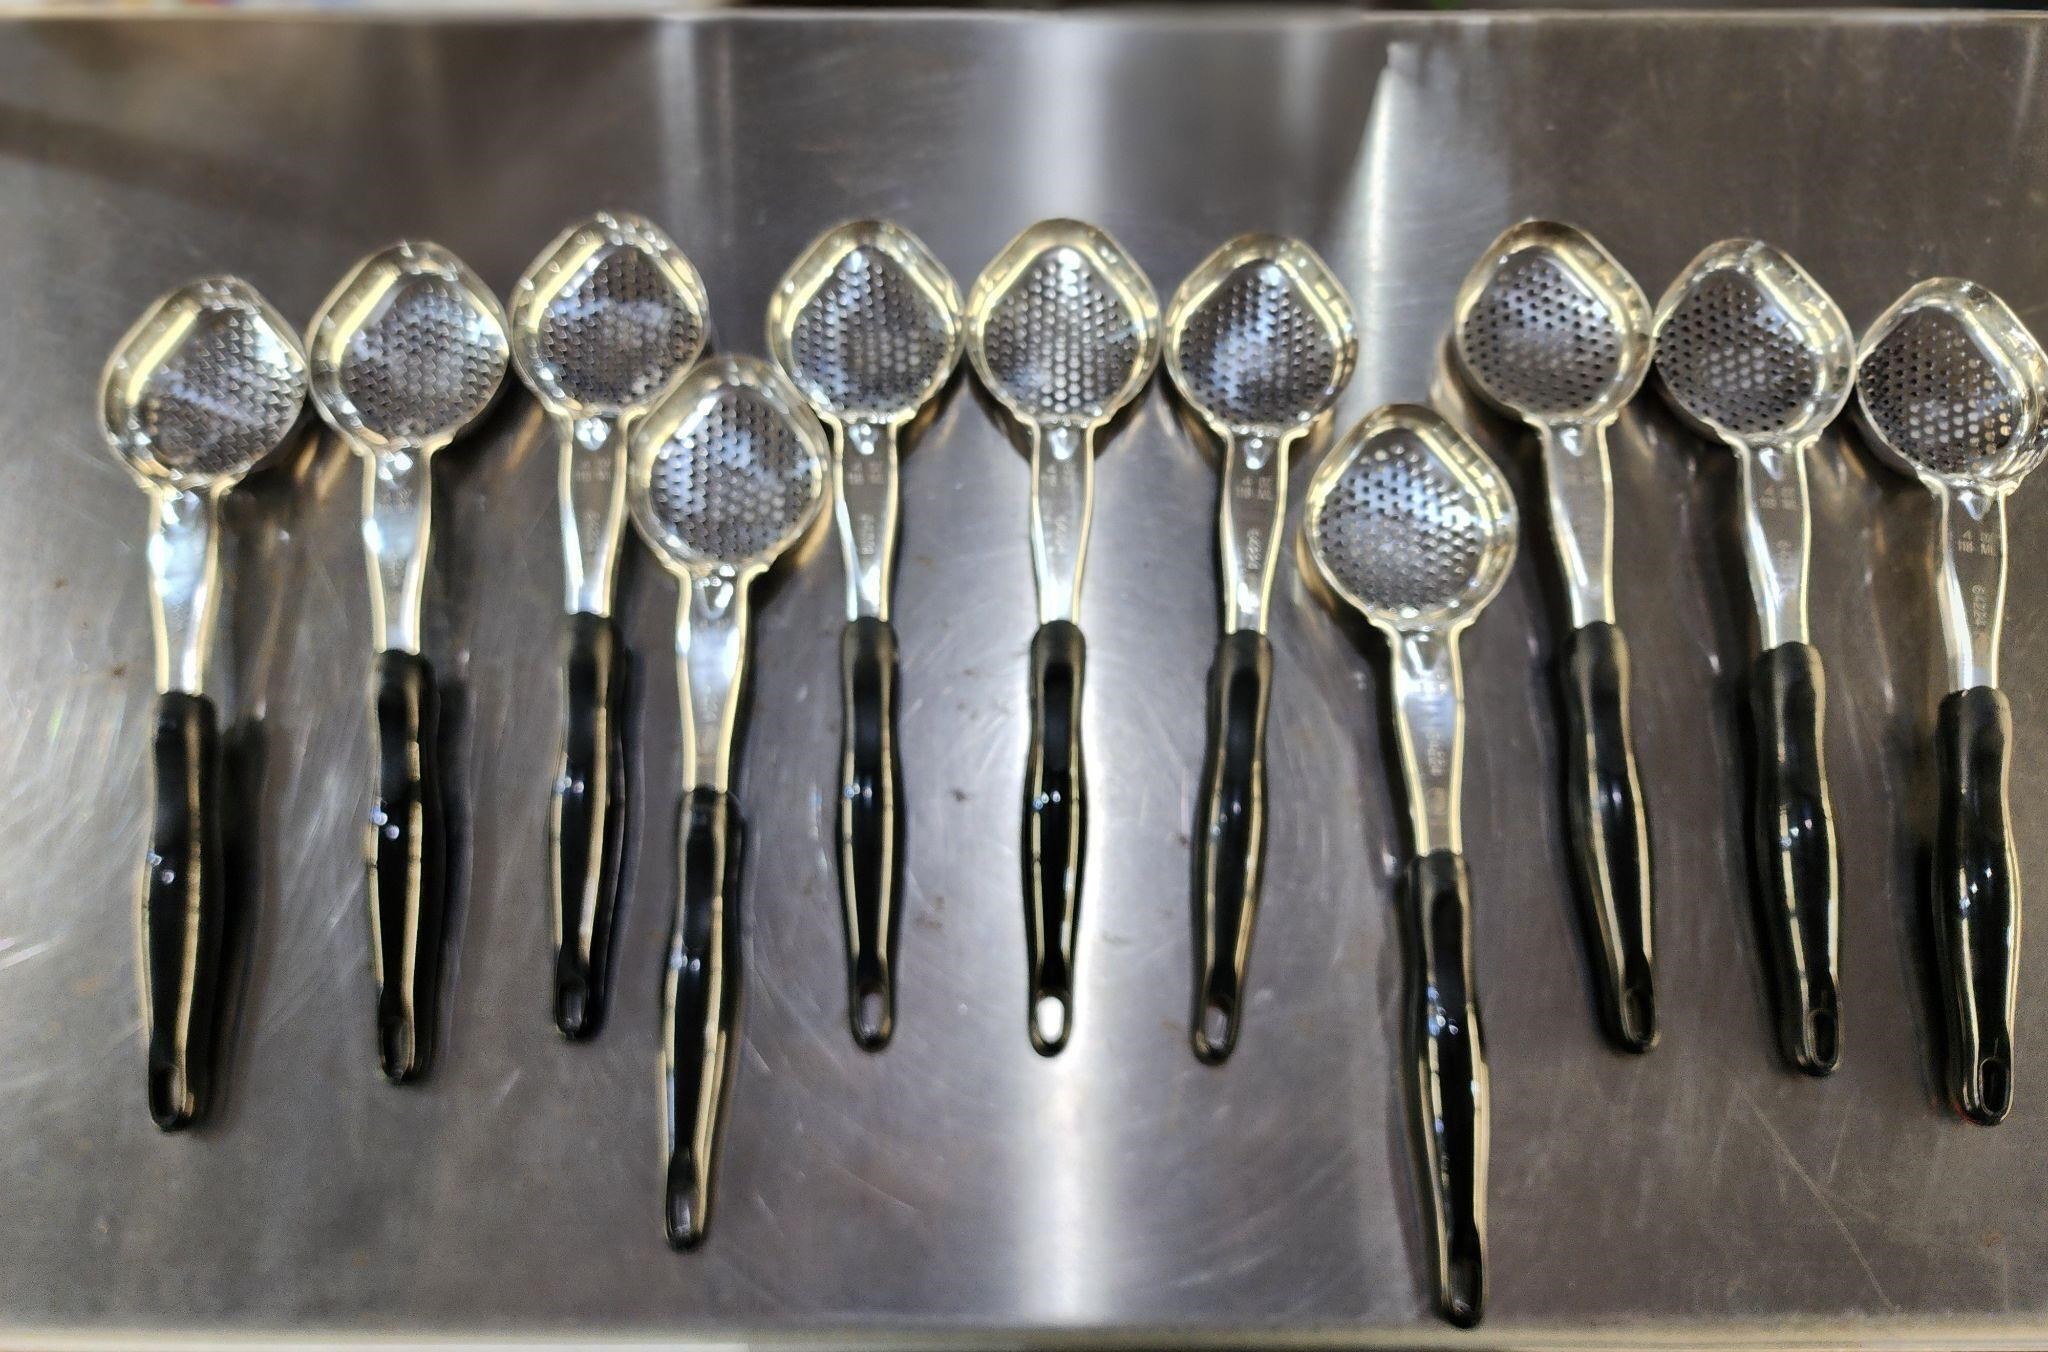 X 11 New Vollrath 4 oz Perforated Spoons